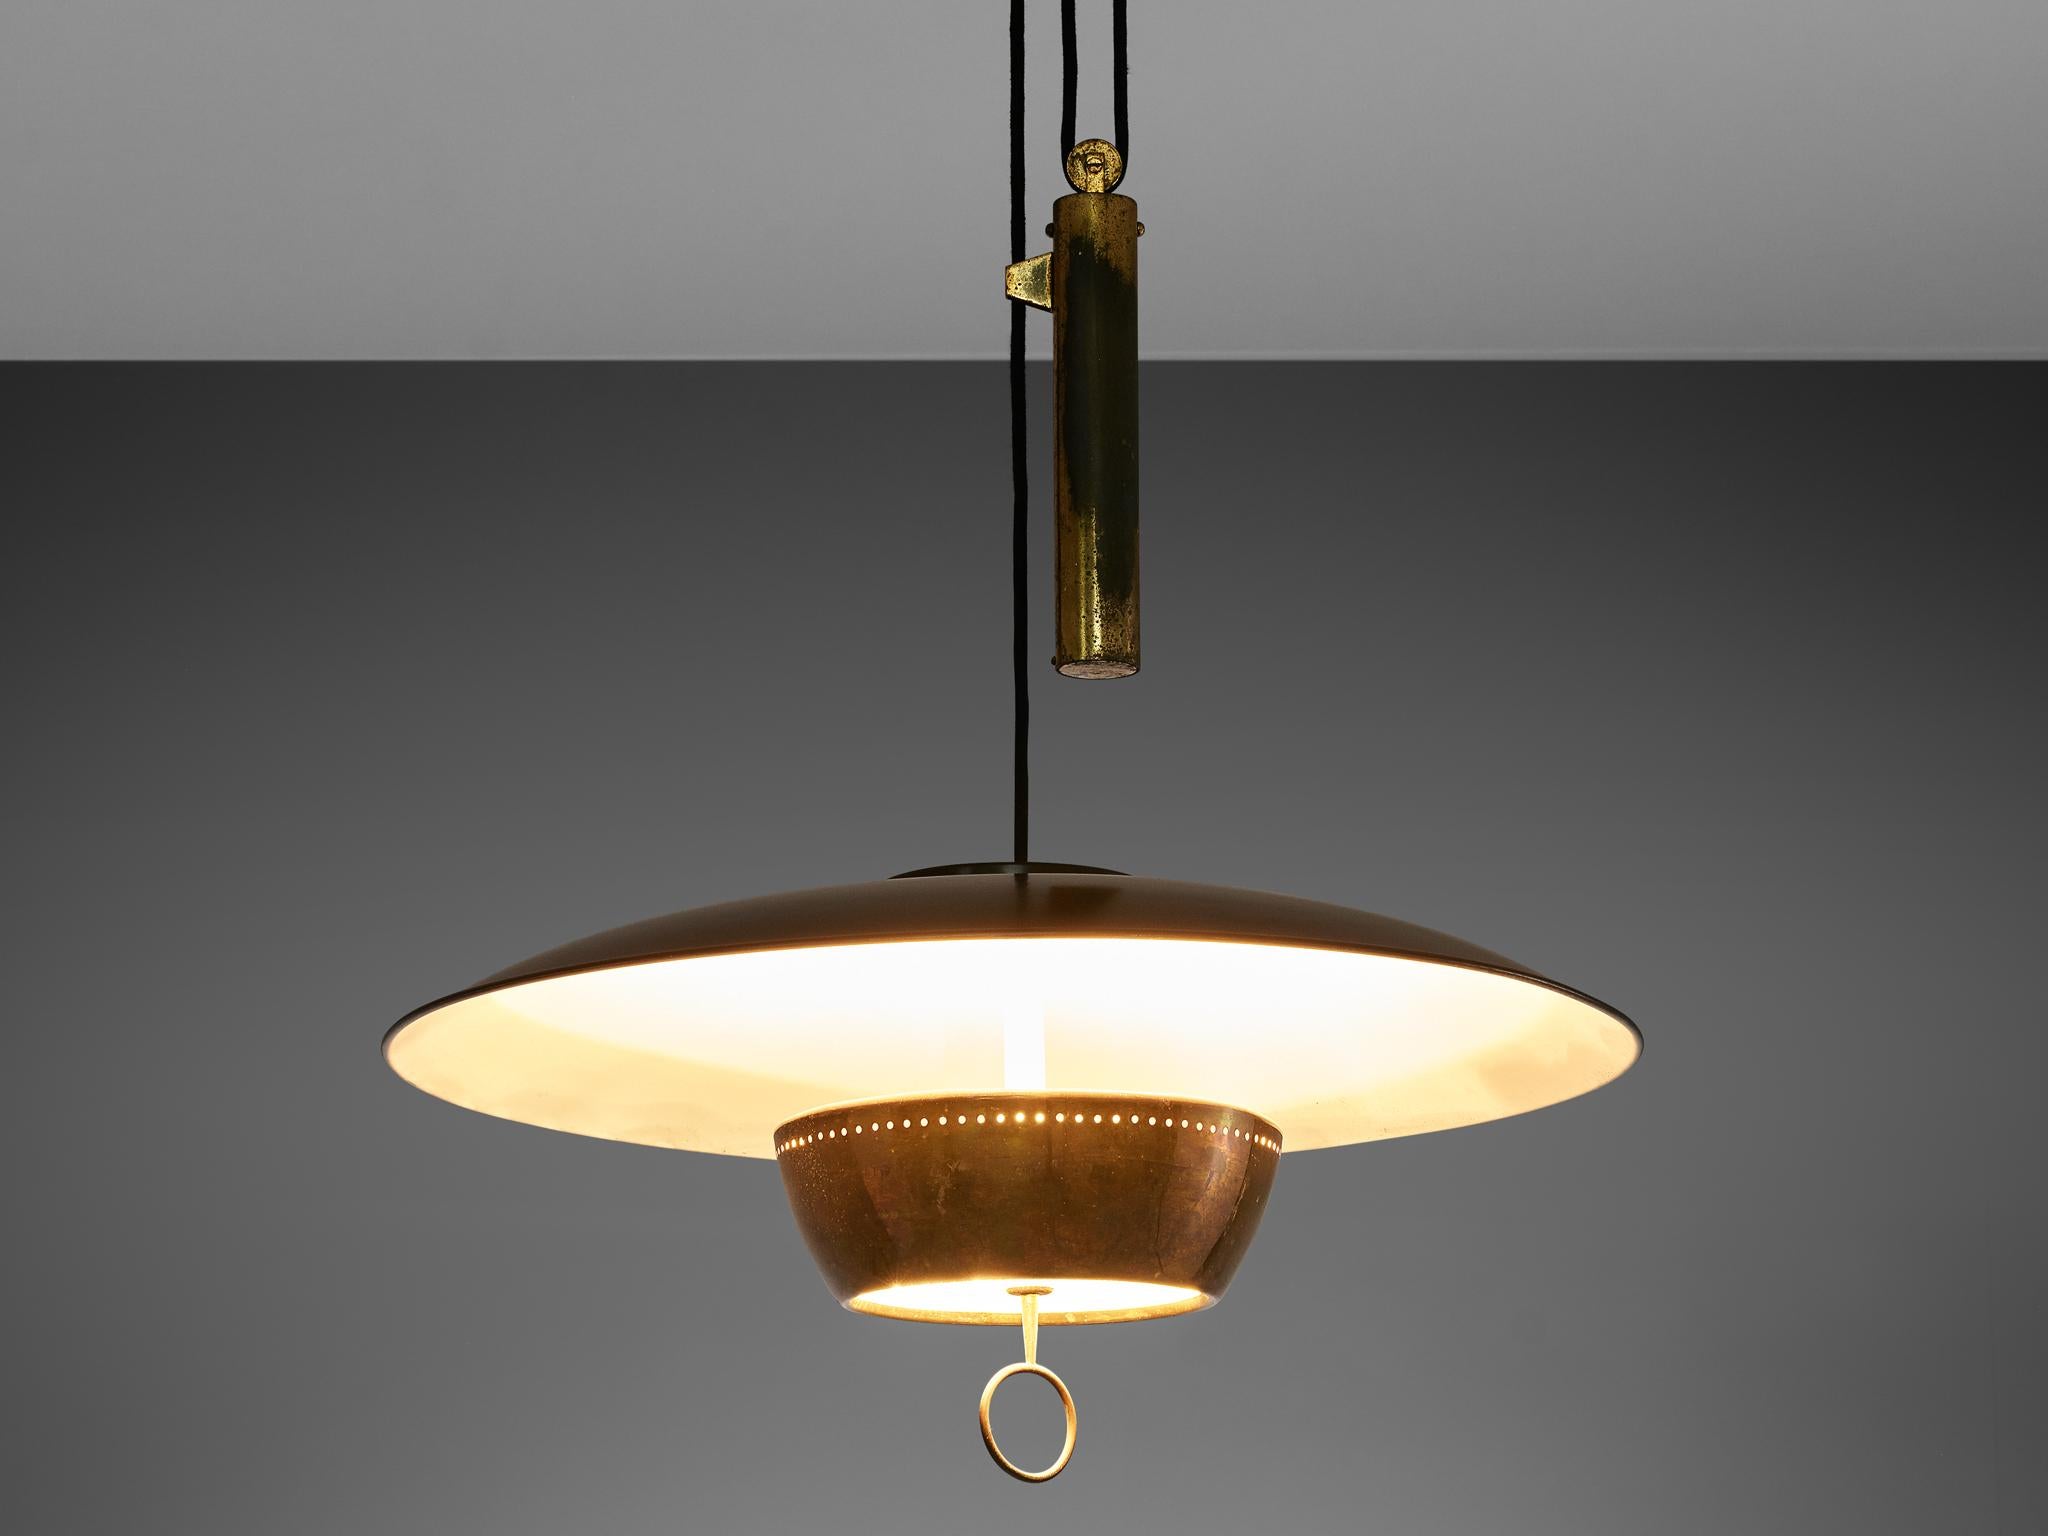 Gaetano Sciolari for Stilnovo, ceiling light model A5011, metal, brass, Italy, 1950

Elegant dynamic and modern pendant by Sciolari for Stilnovo. Adjustable in height due the counterweight. The light gets beautifully reflected by the white inside of